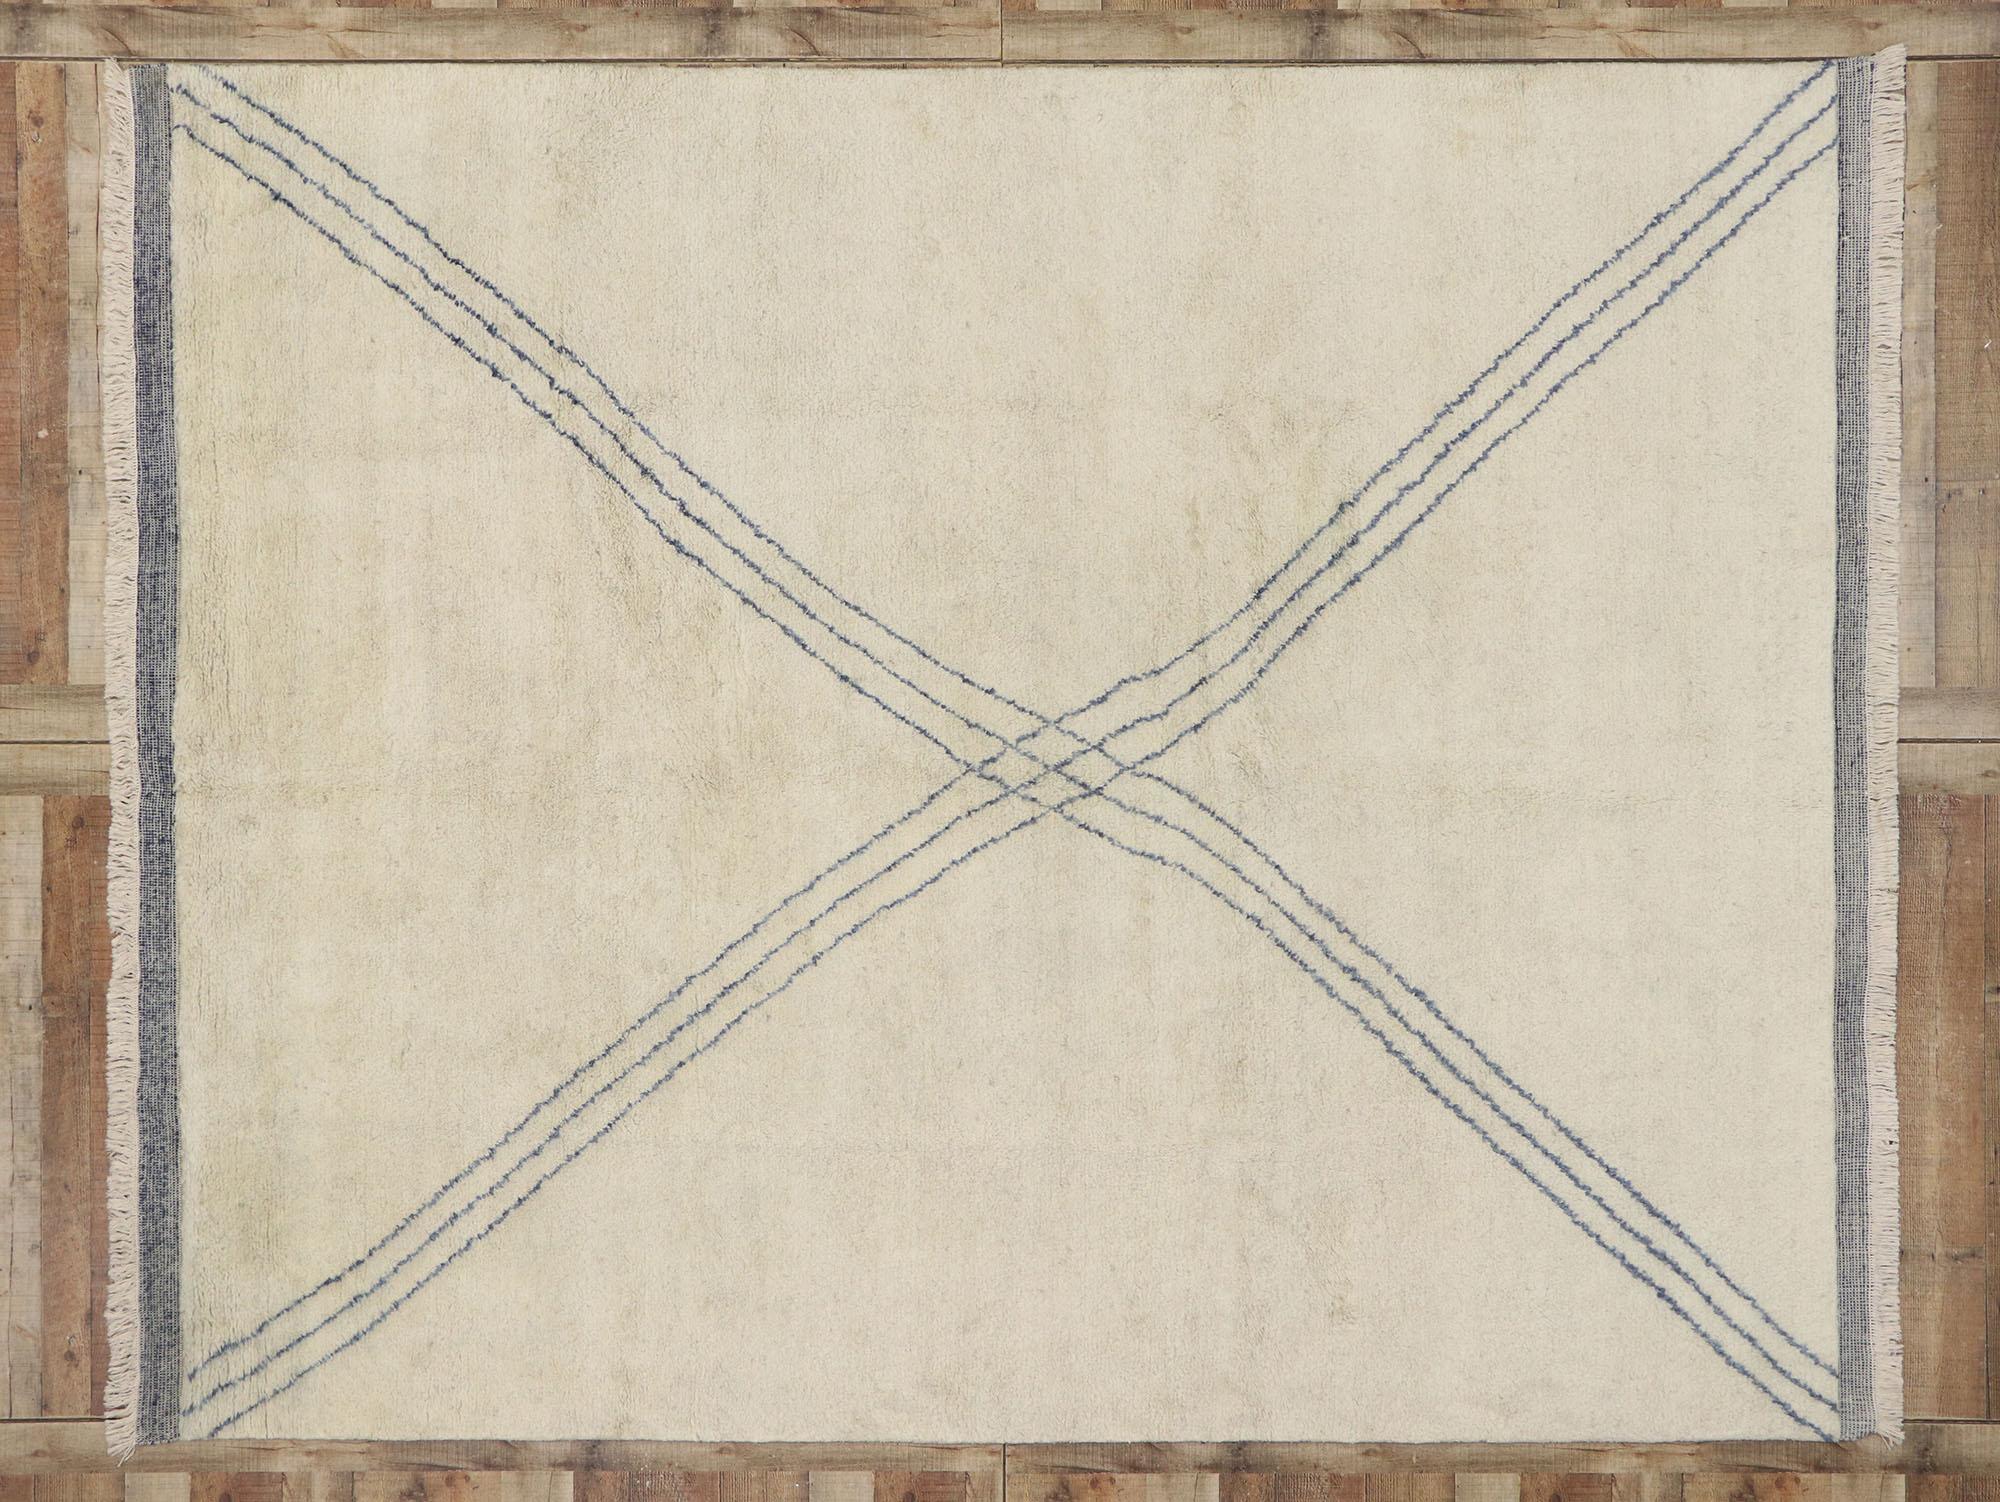 30531, Mid-Century Modern Moroccan Style Rug, 08'01 x 10'02. 
This hand knotted wool Moroccan style rug features a large X-shape composed from three thin bluish lines on a beige backdrop. Beautiful detail and simplistic linear design combined with